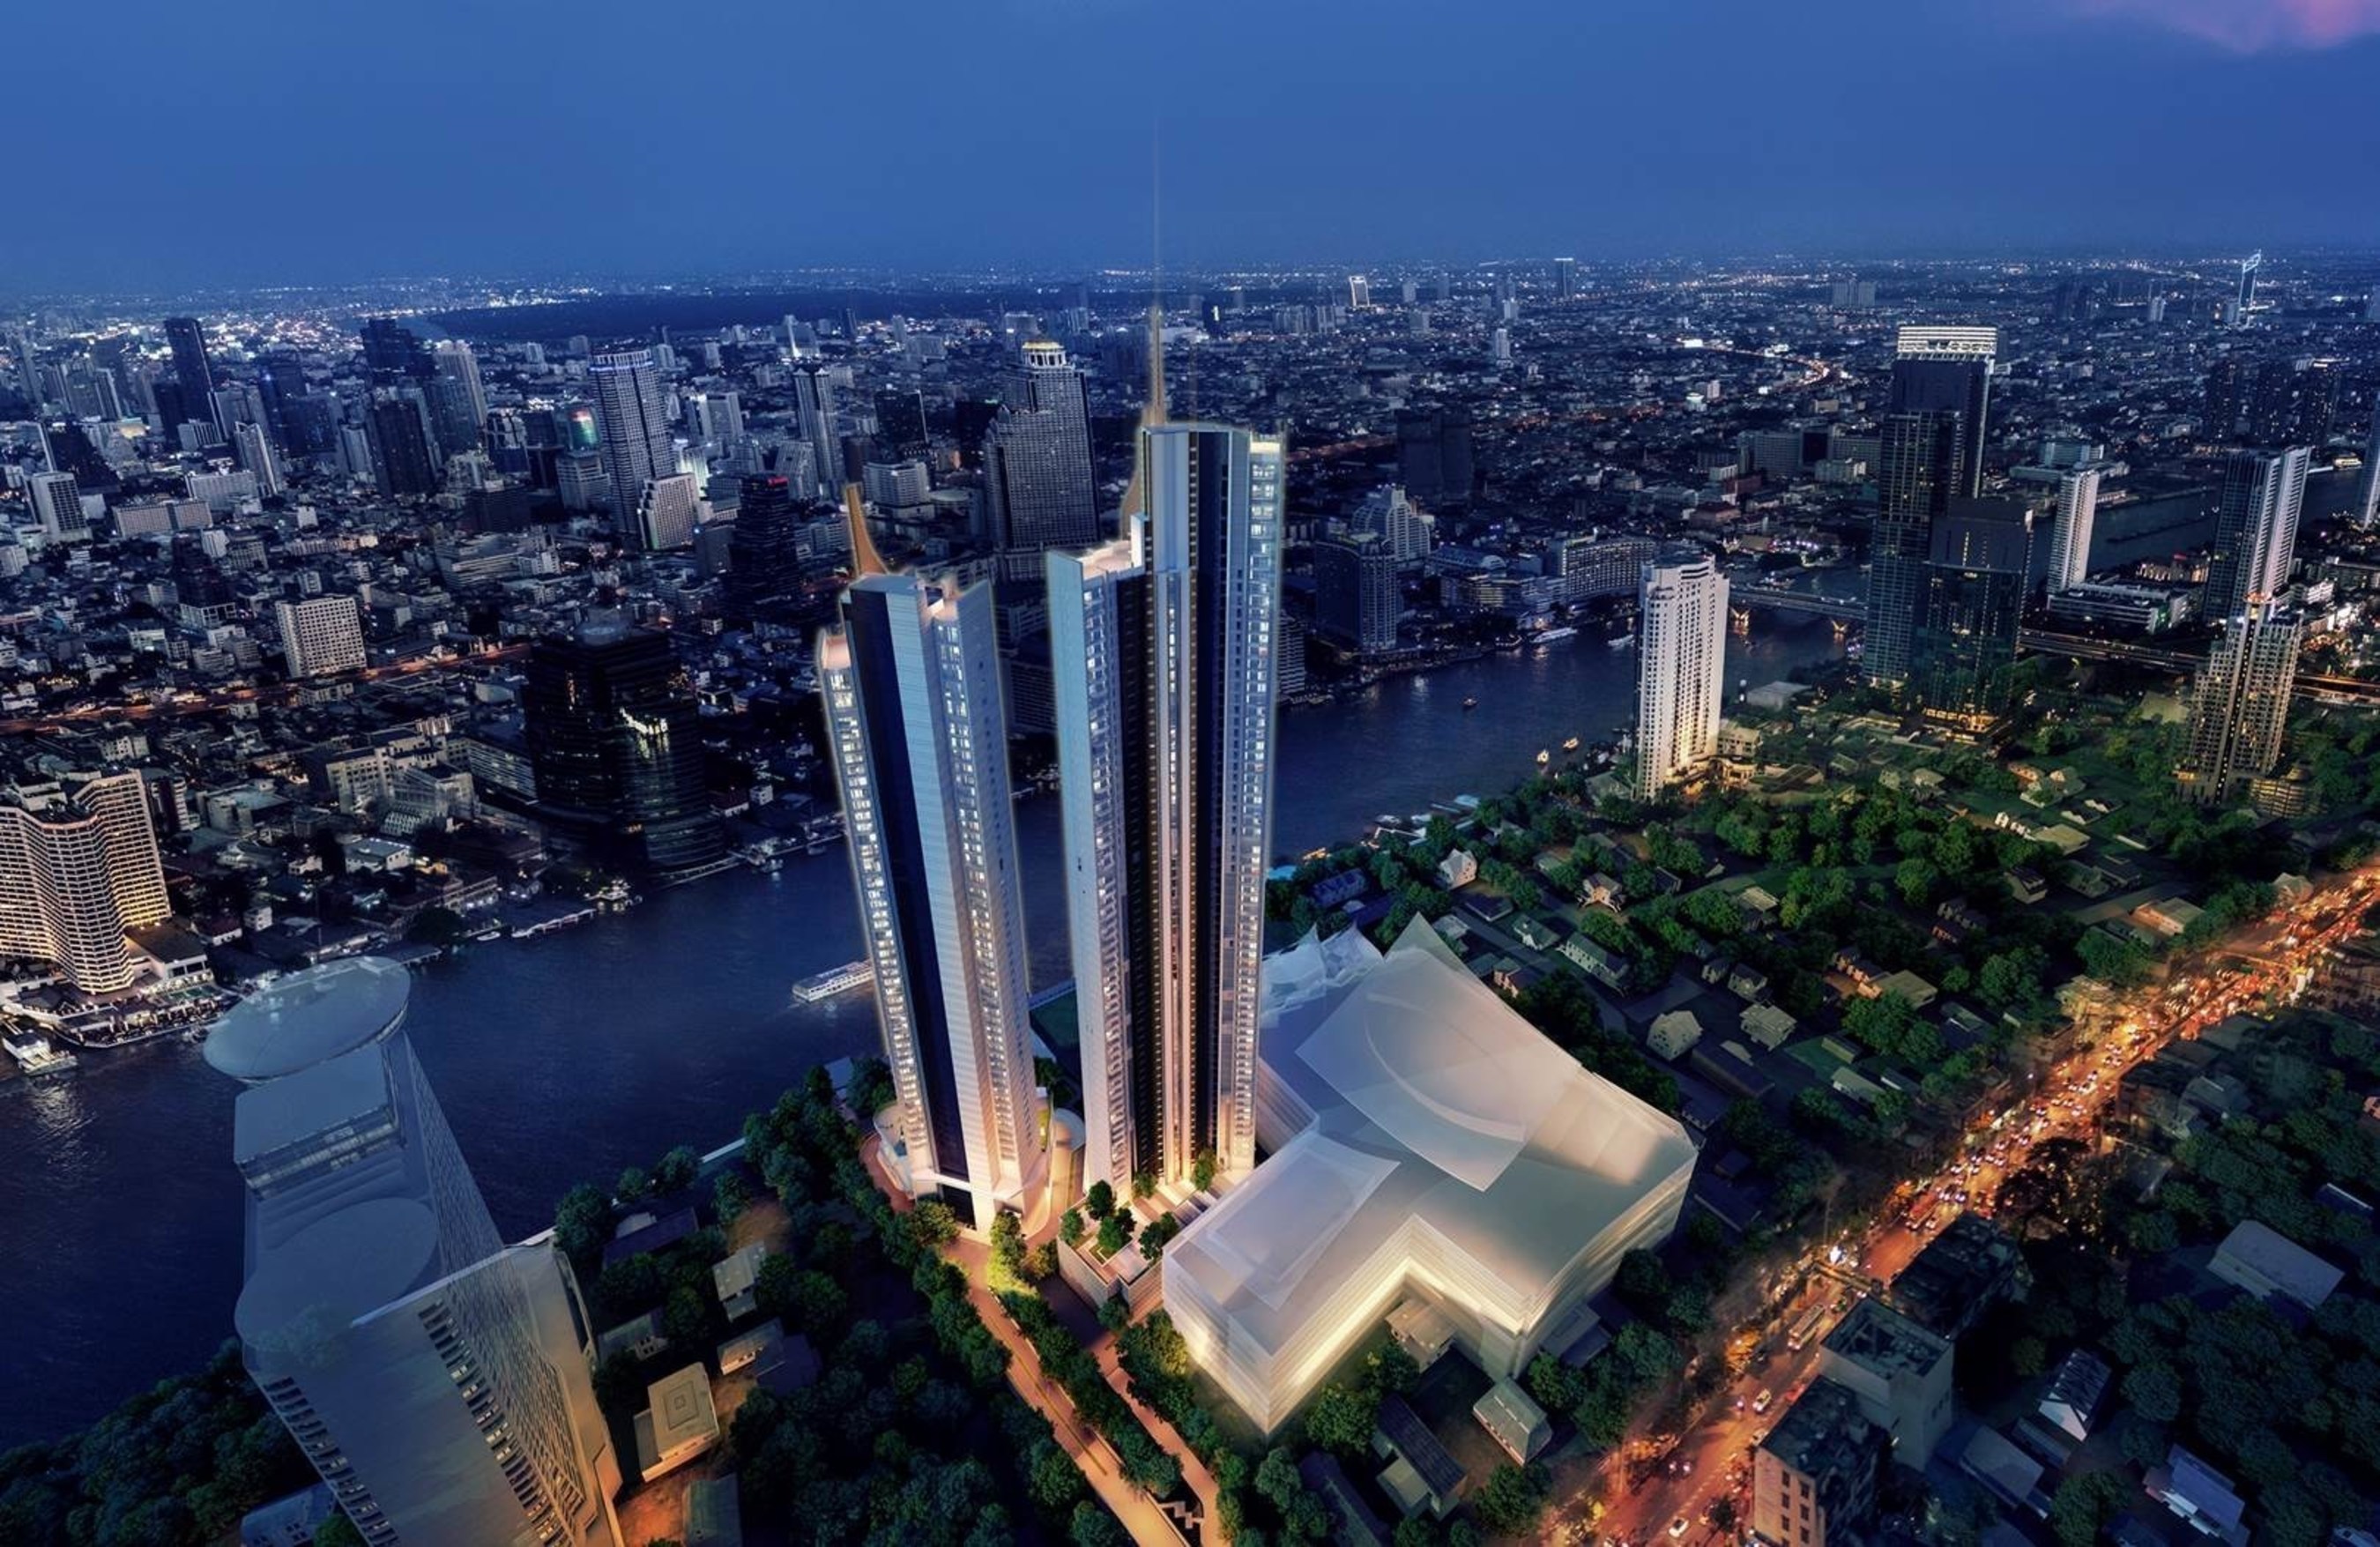 ‘The Residences at Mandarin Oriental, Bangkok’ are designed and being built to the highest standards of luxury that, together with their enchanting location, make these residences among the best in the world.